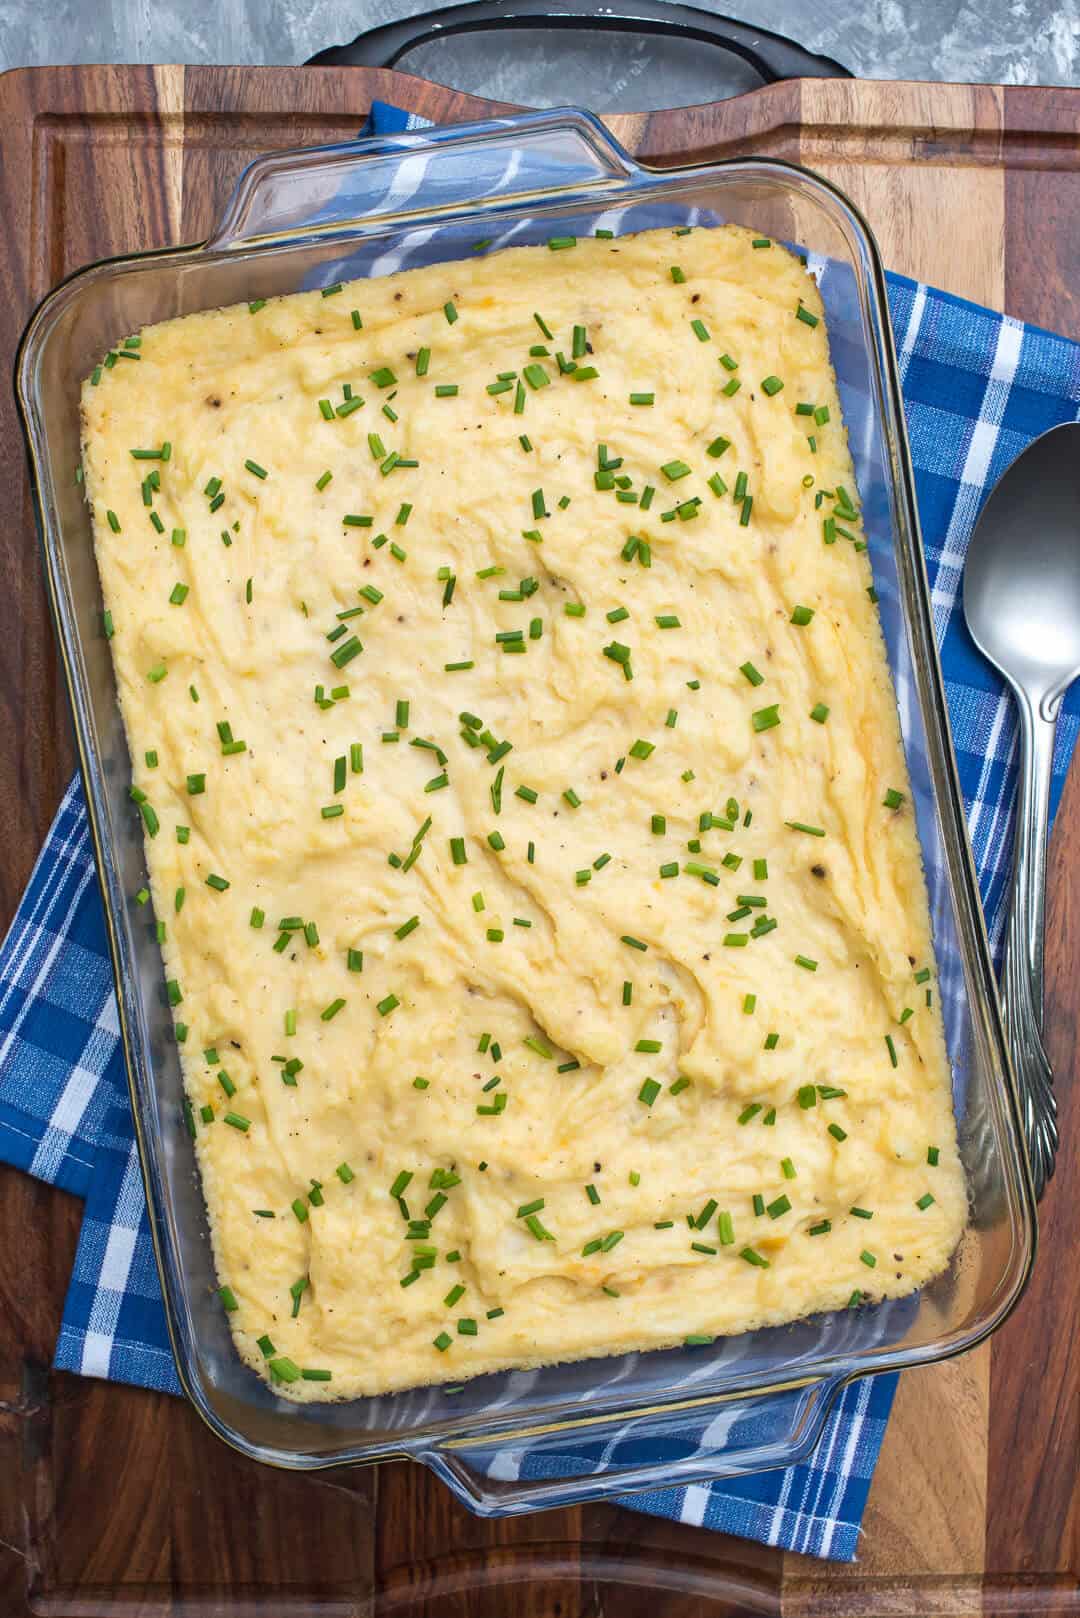 Mashed potatoes topped with chives in a 13-inch x 9-inch baking dish.